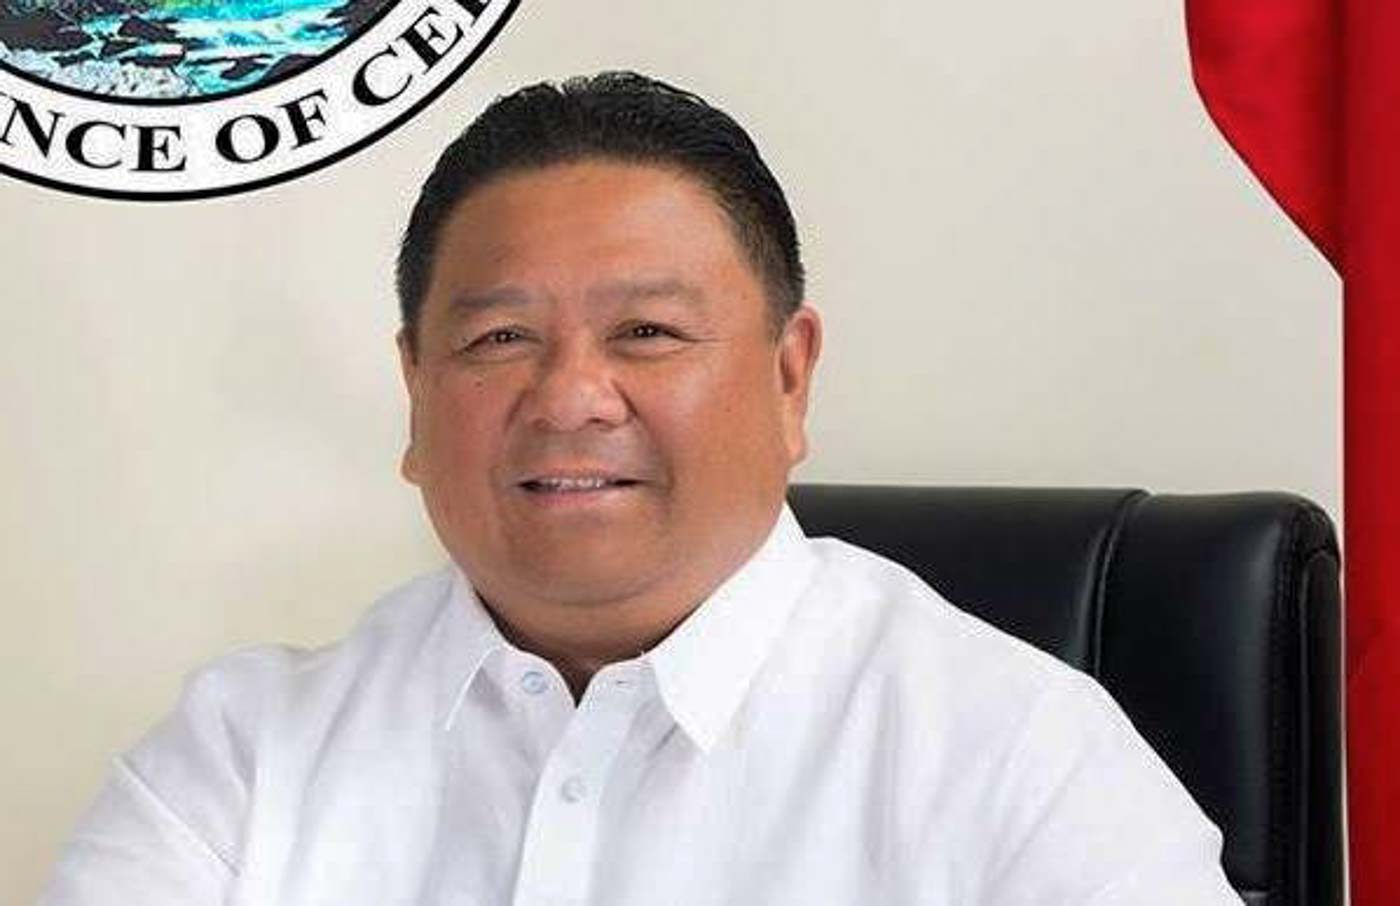 Another brother of Cebu Governor Garcia dies